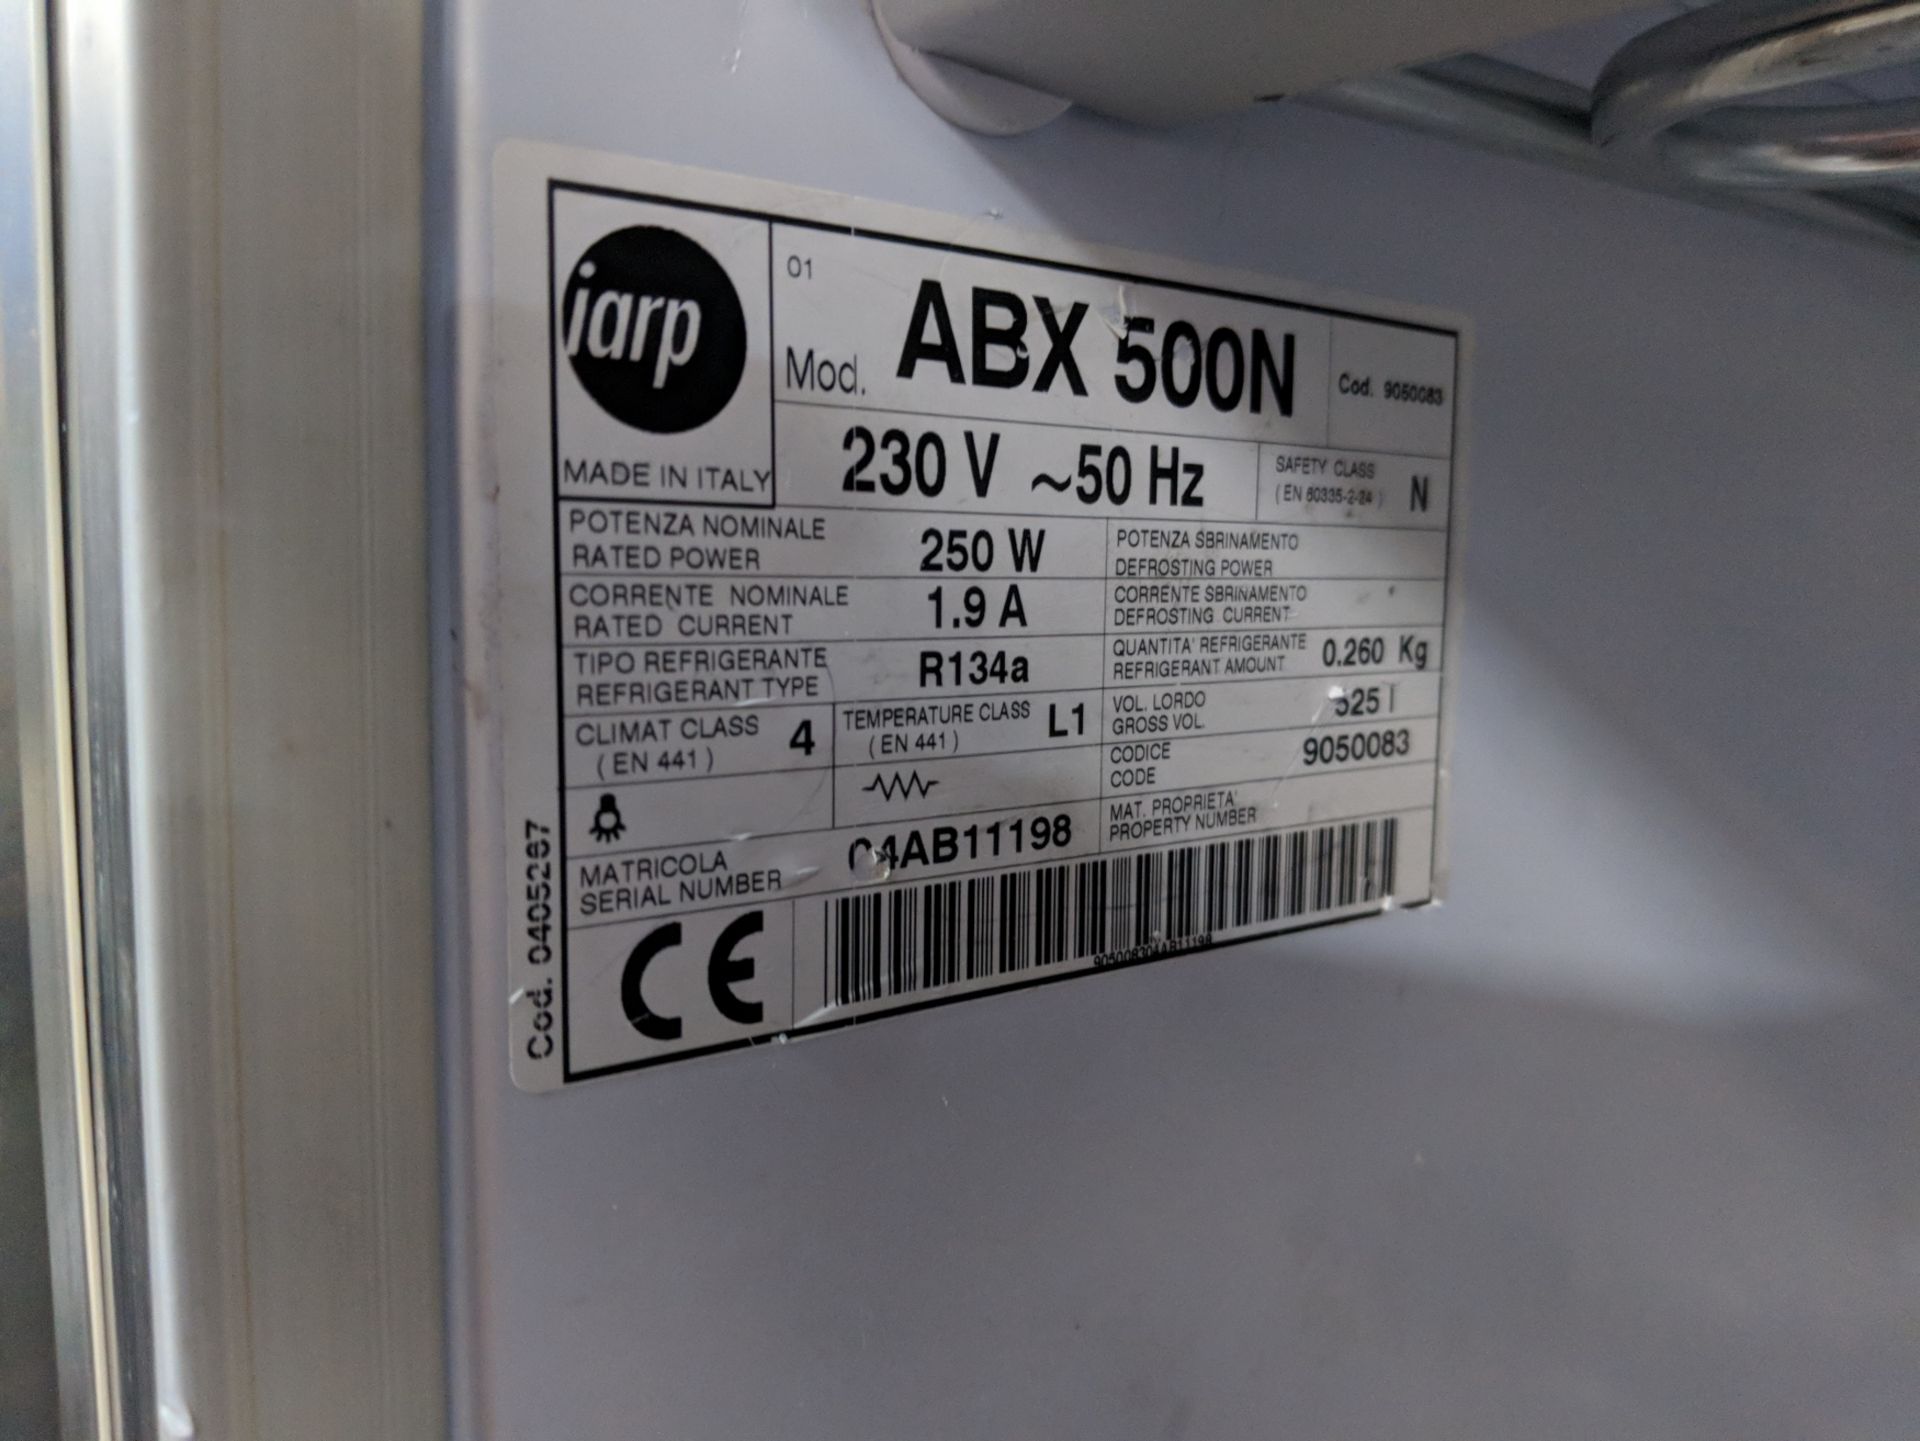 Iarp large wide silver freezer model ABX500N IMPORTANT: Please remember goods successfully bid - Image 3 of 3